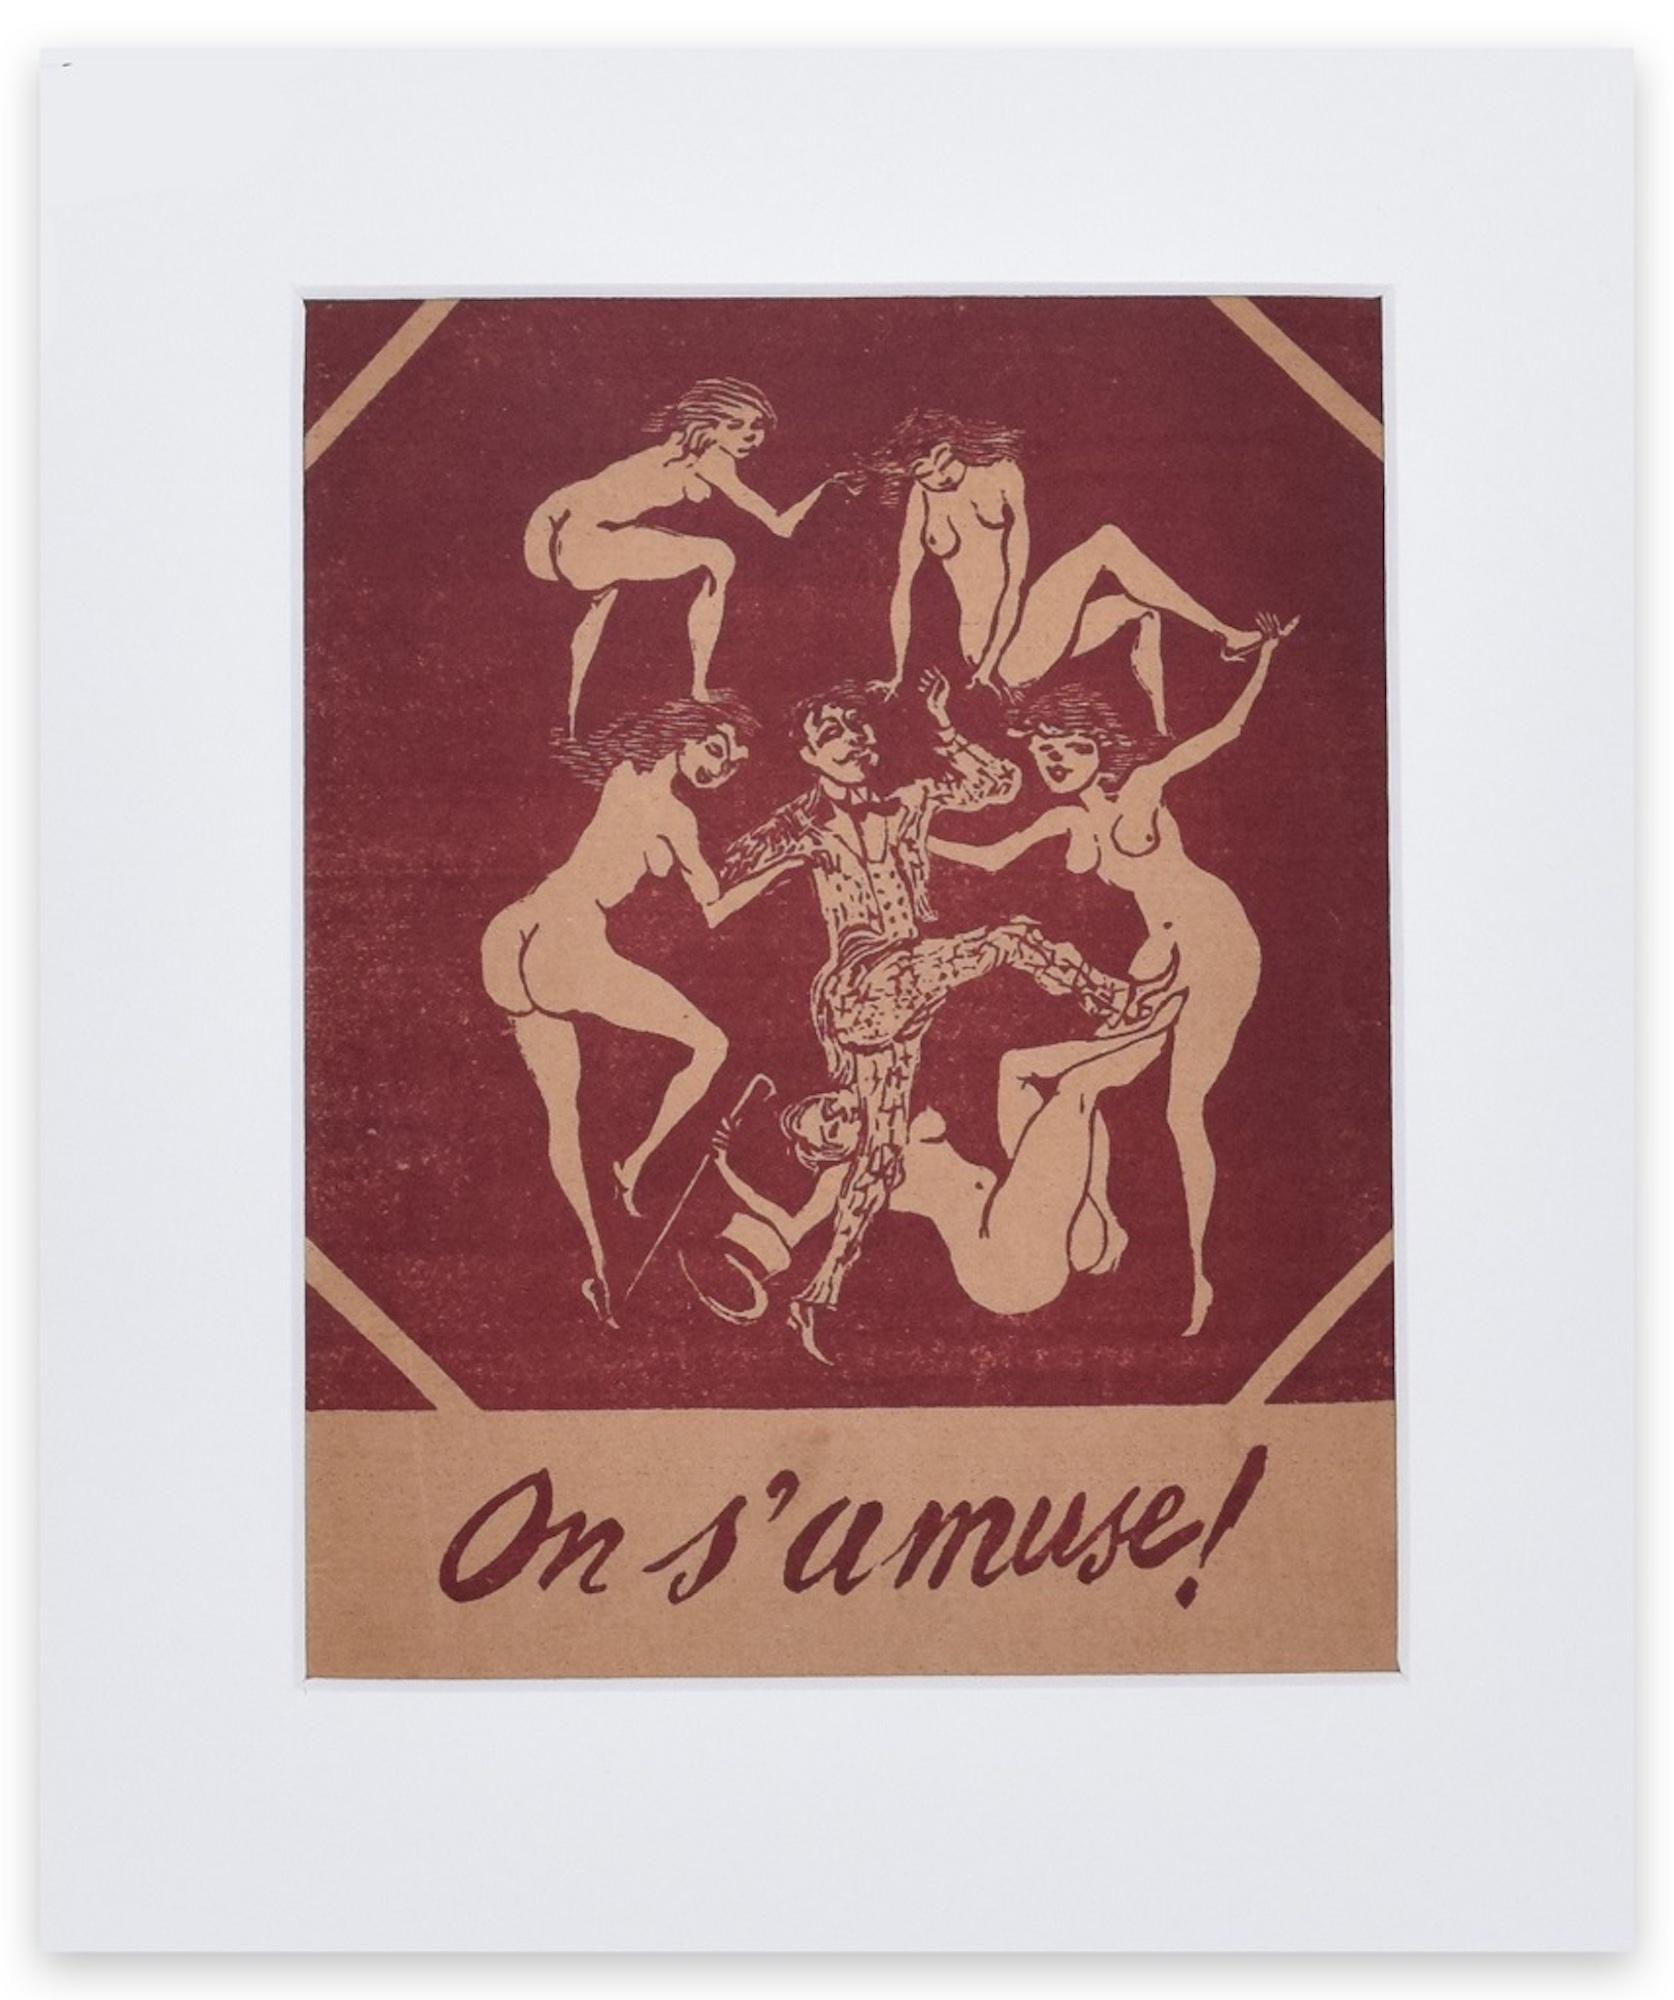 On S'Amuse is an original artwork realized in 1945 by Mino Maccari.

Original colored xylograph.

Includes passepartout: 49 x 33.5 cm

Good conditions except for yellowing of paper due to the time and some foxings.

This beautiful print represents